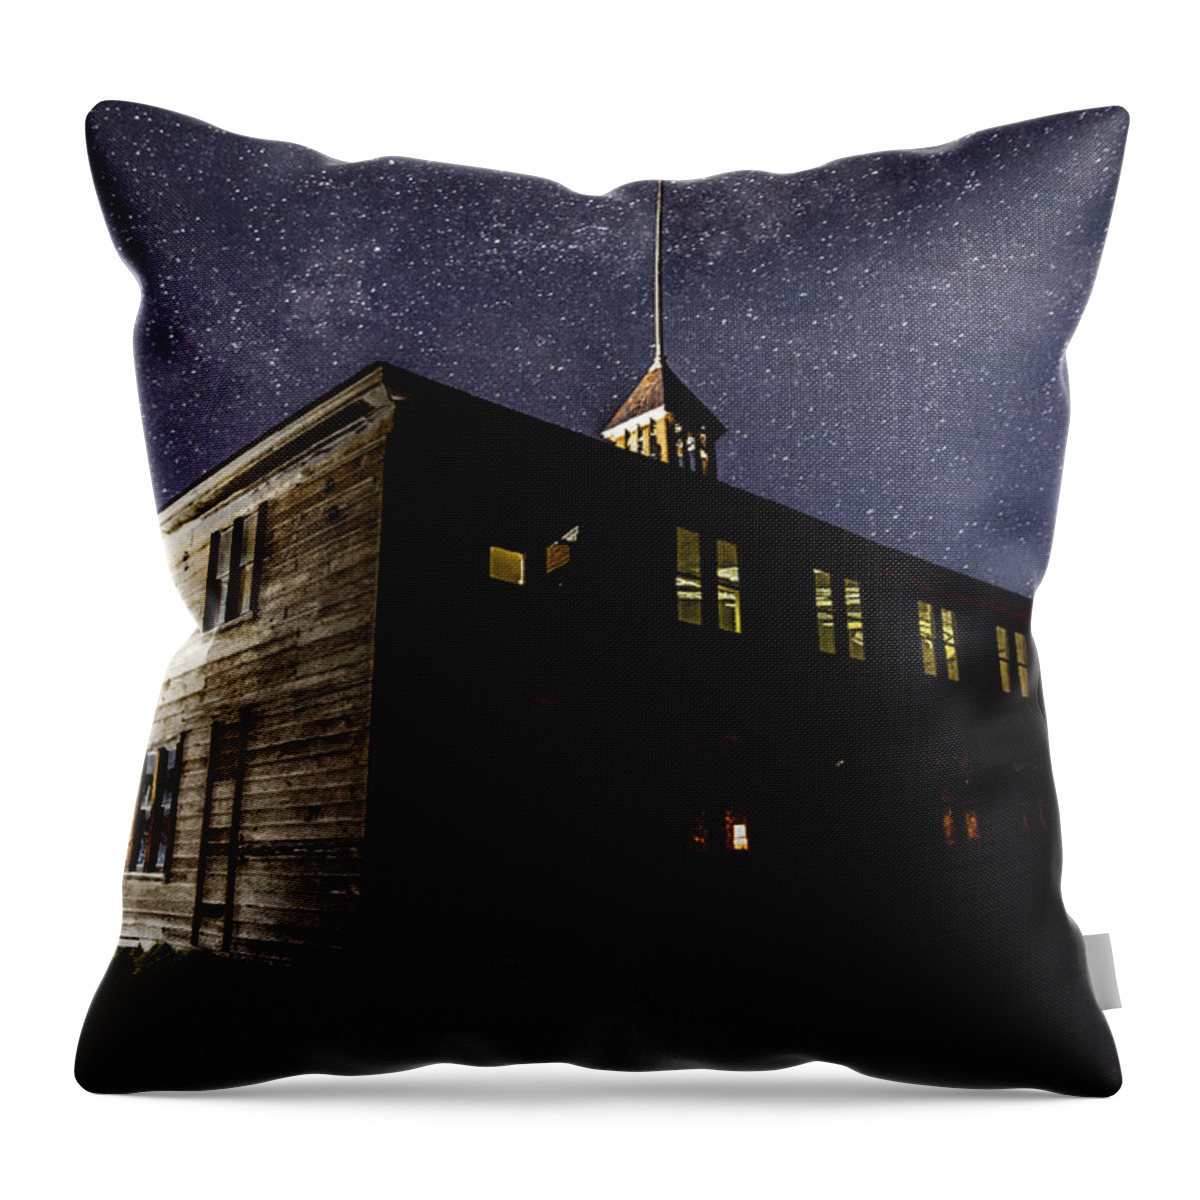 California Throw Pillow featuring the photograph Bodie Schoolhouse by Cat Connor